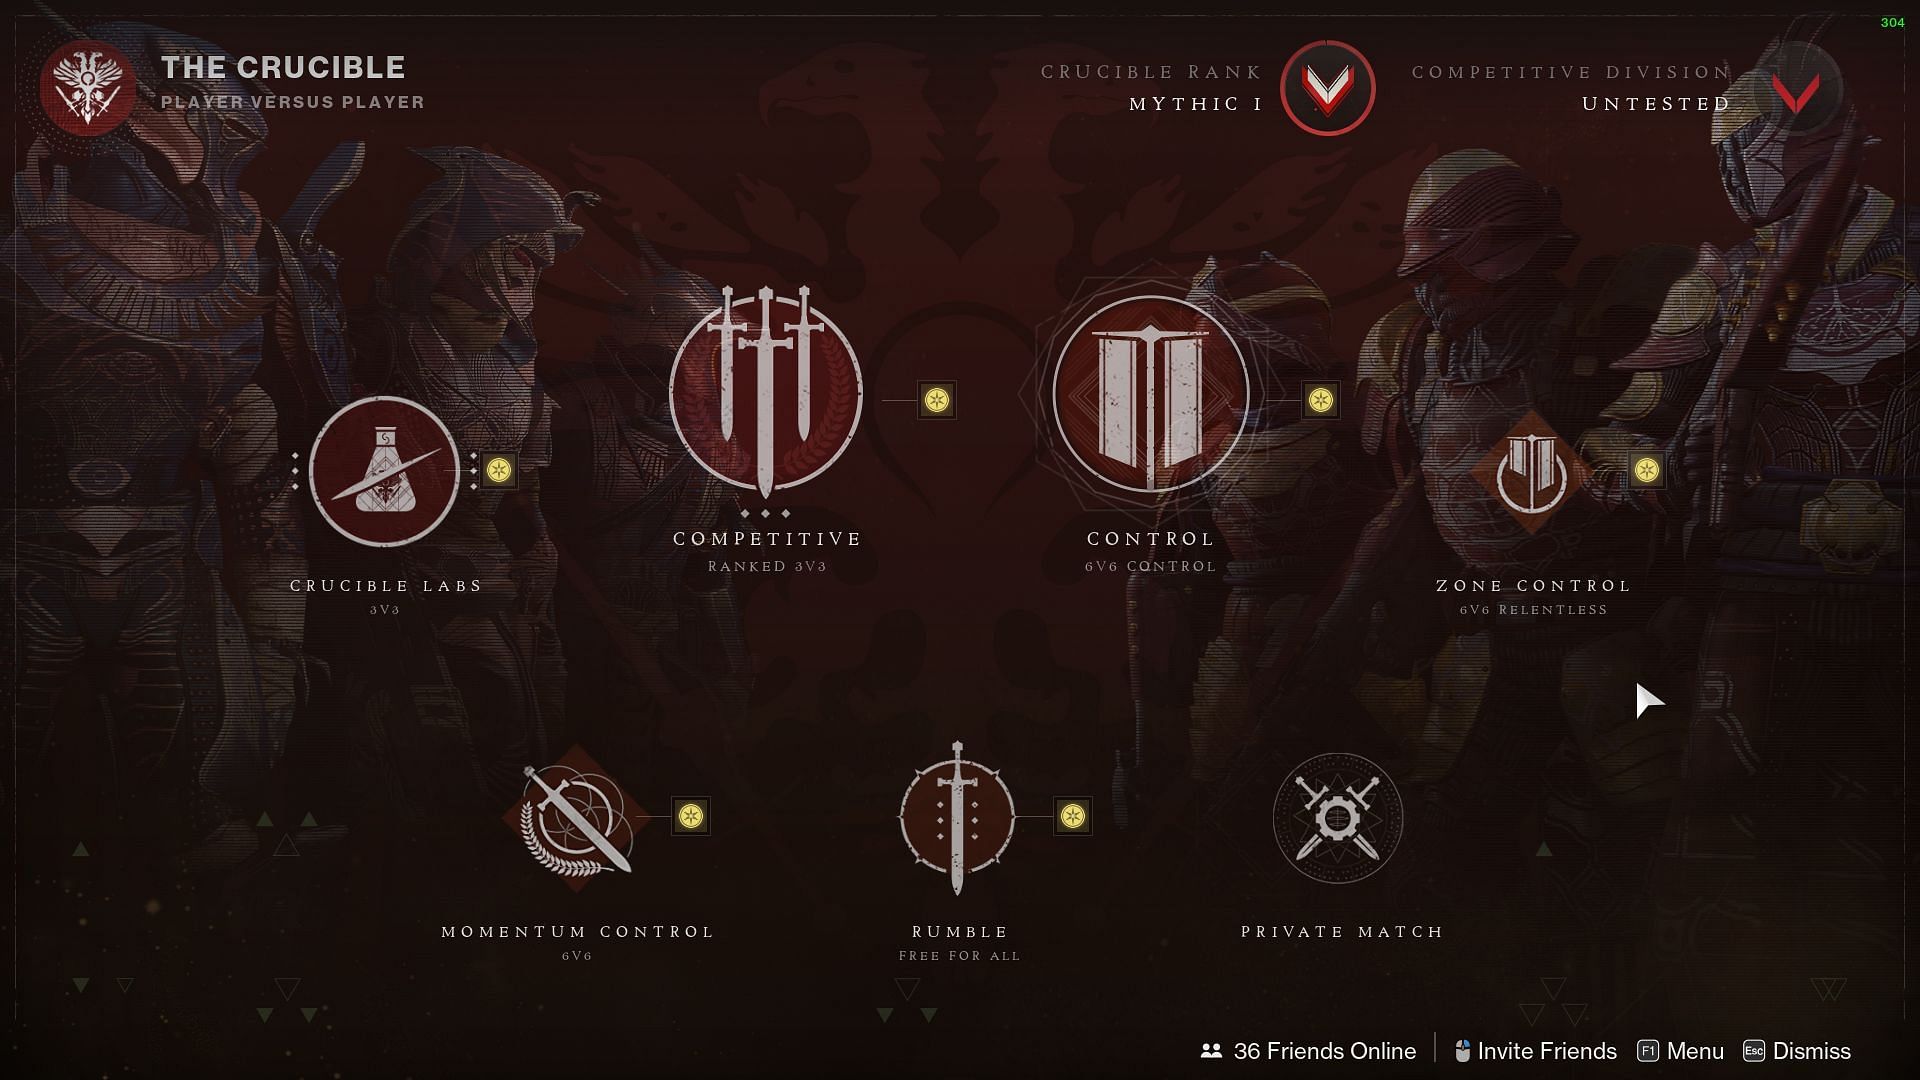 5 best tips and tricks to become better at competitive Destiny 2 PvP